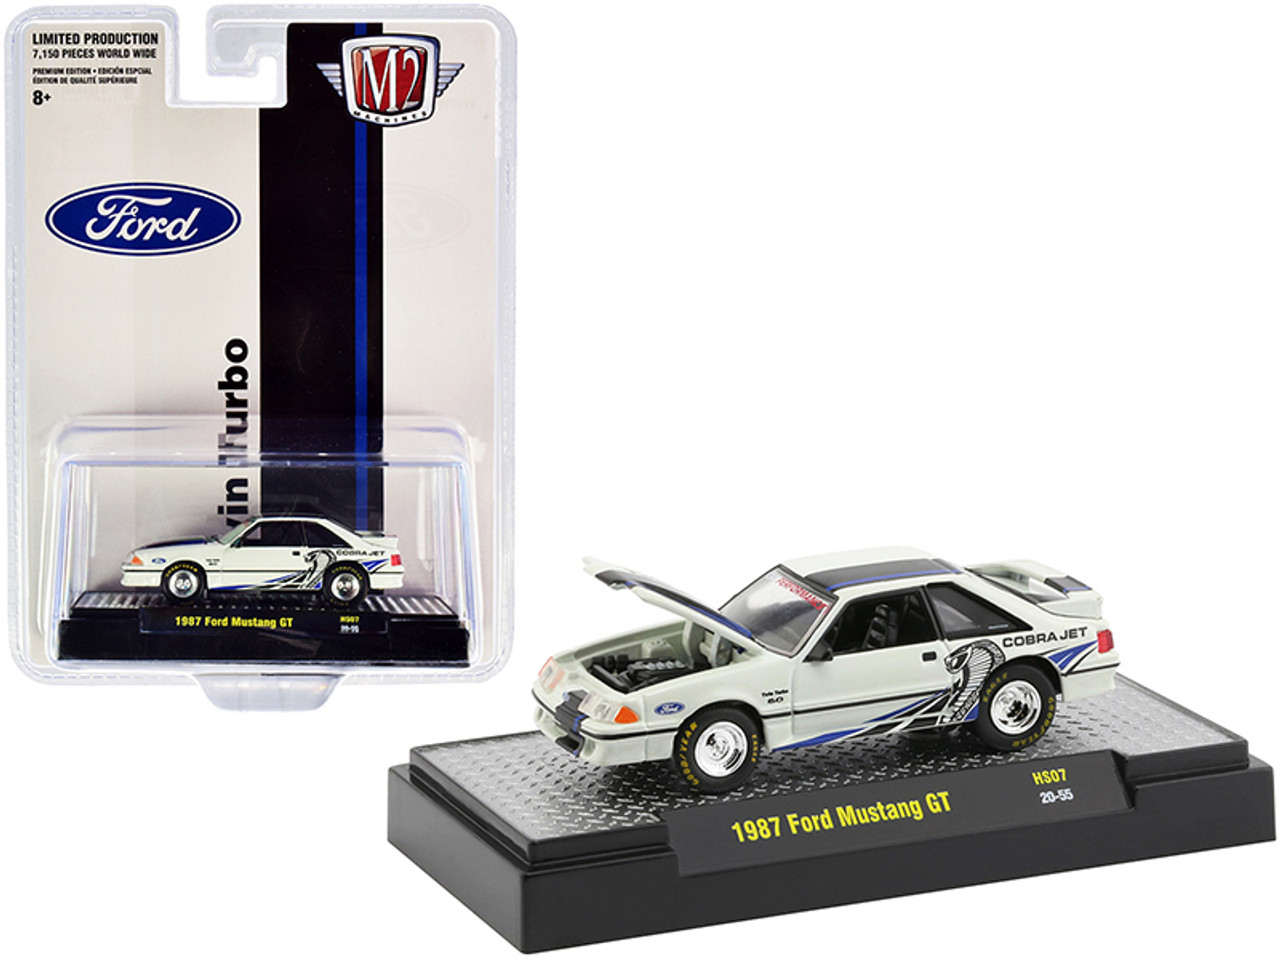 1987 Ford Mustang GT "Twin Turbo" Wimbledon White with Black and Blue Stripes Limited Edition to 7150 pieces Worldwide 1/64 Diecast Model Car by M2 Machines